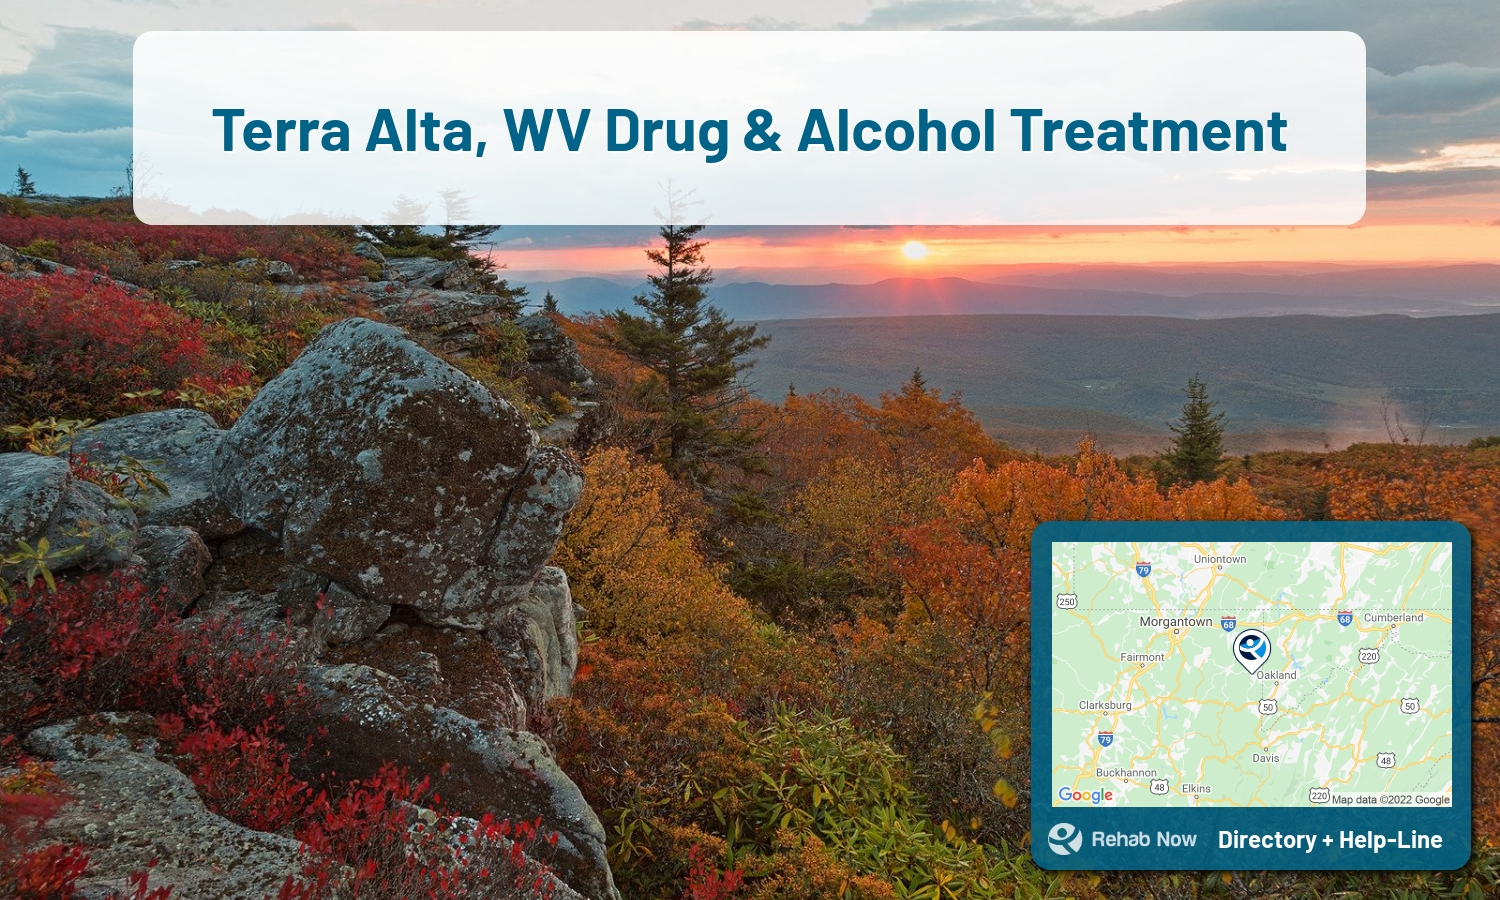 Terra Alta, WV Treatment Centers. Find drug rehab in Terra Alta, West Virginia, or detox and treatment programs. Get the right help now!